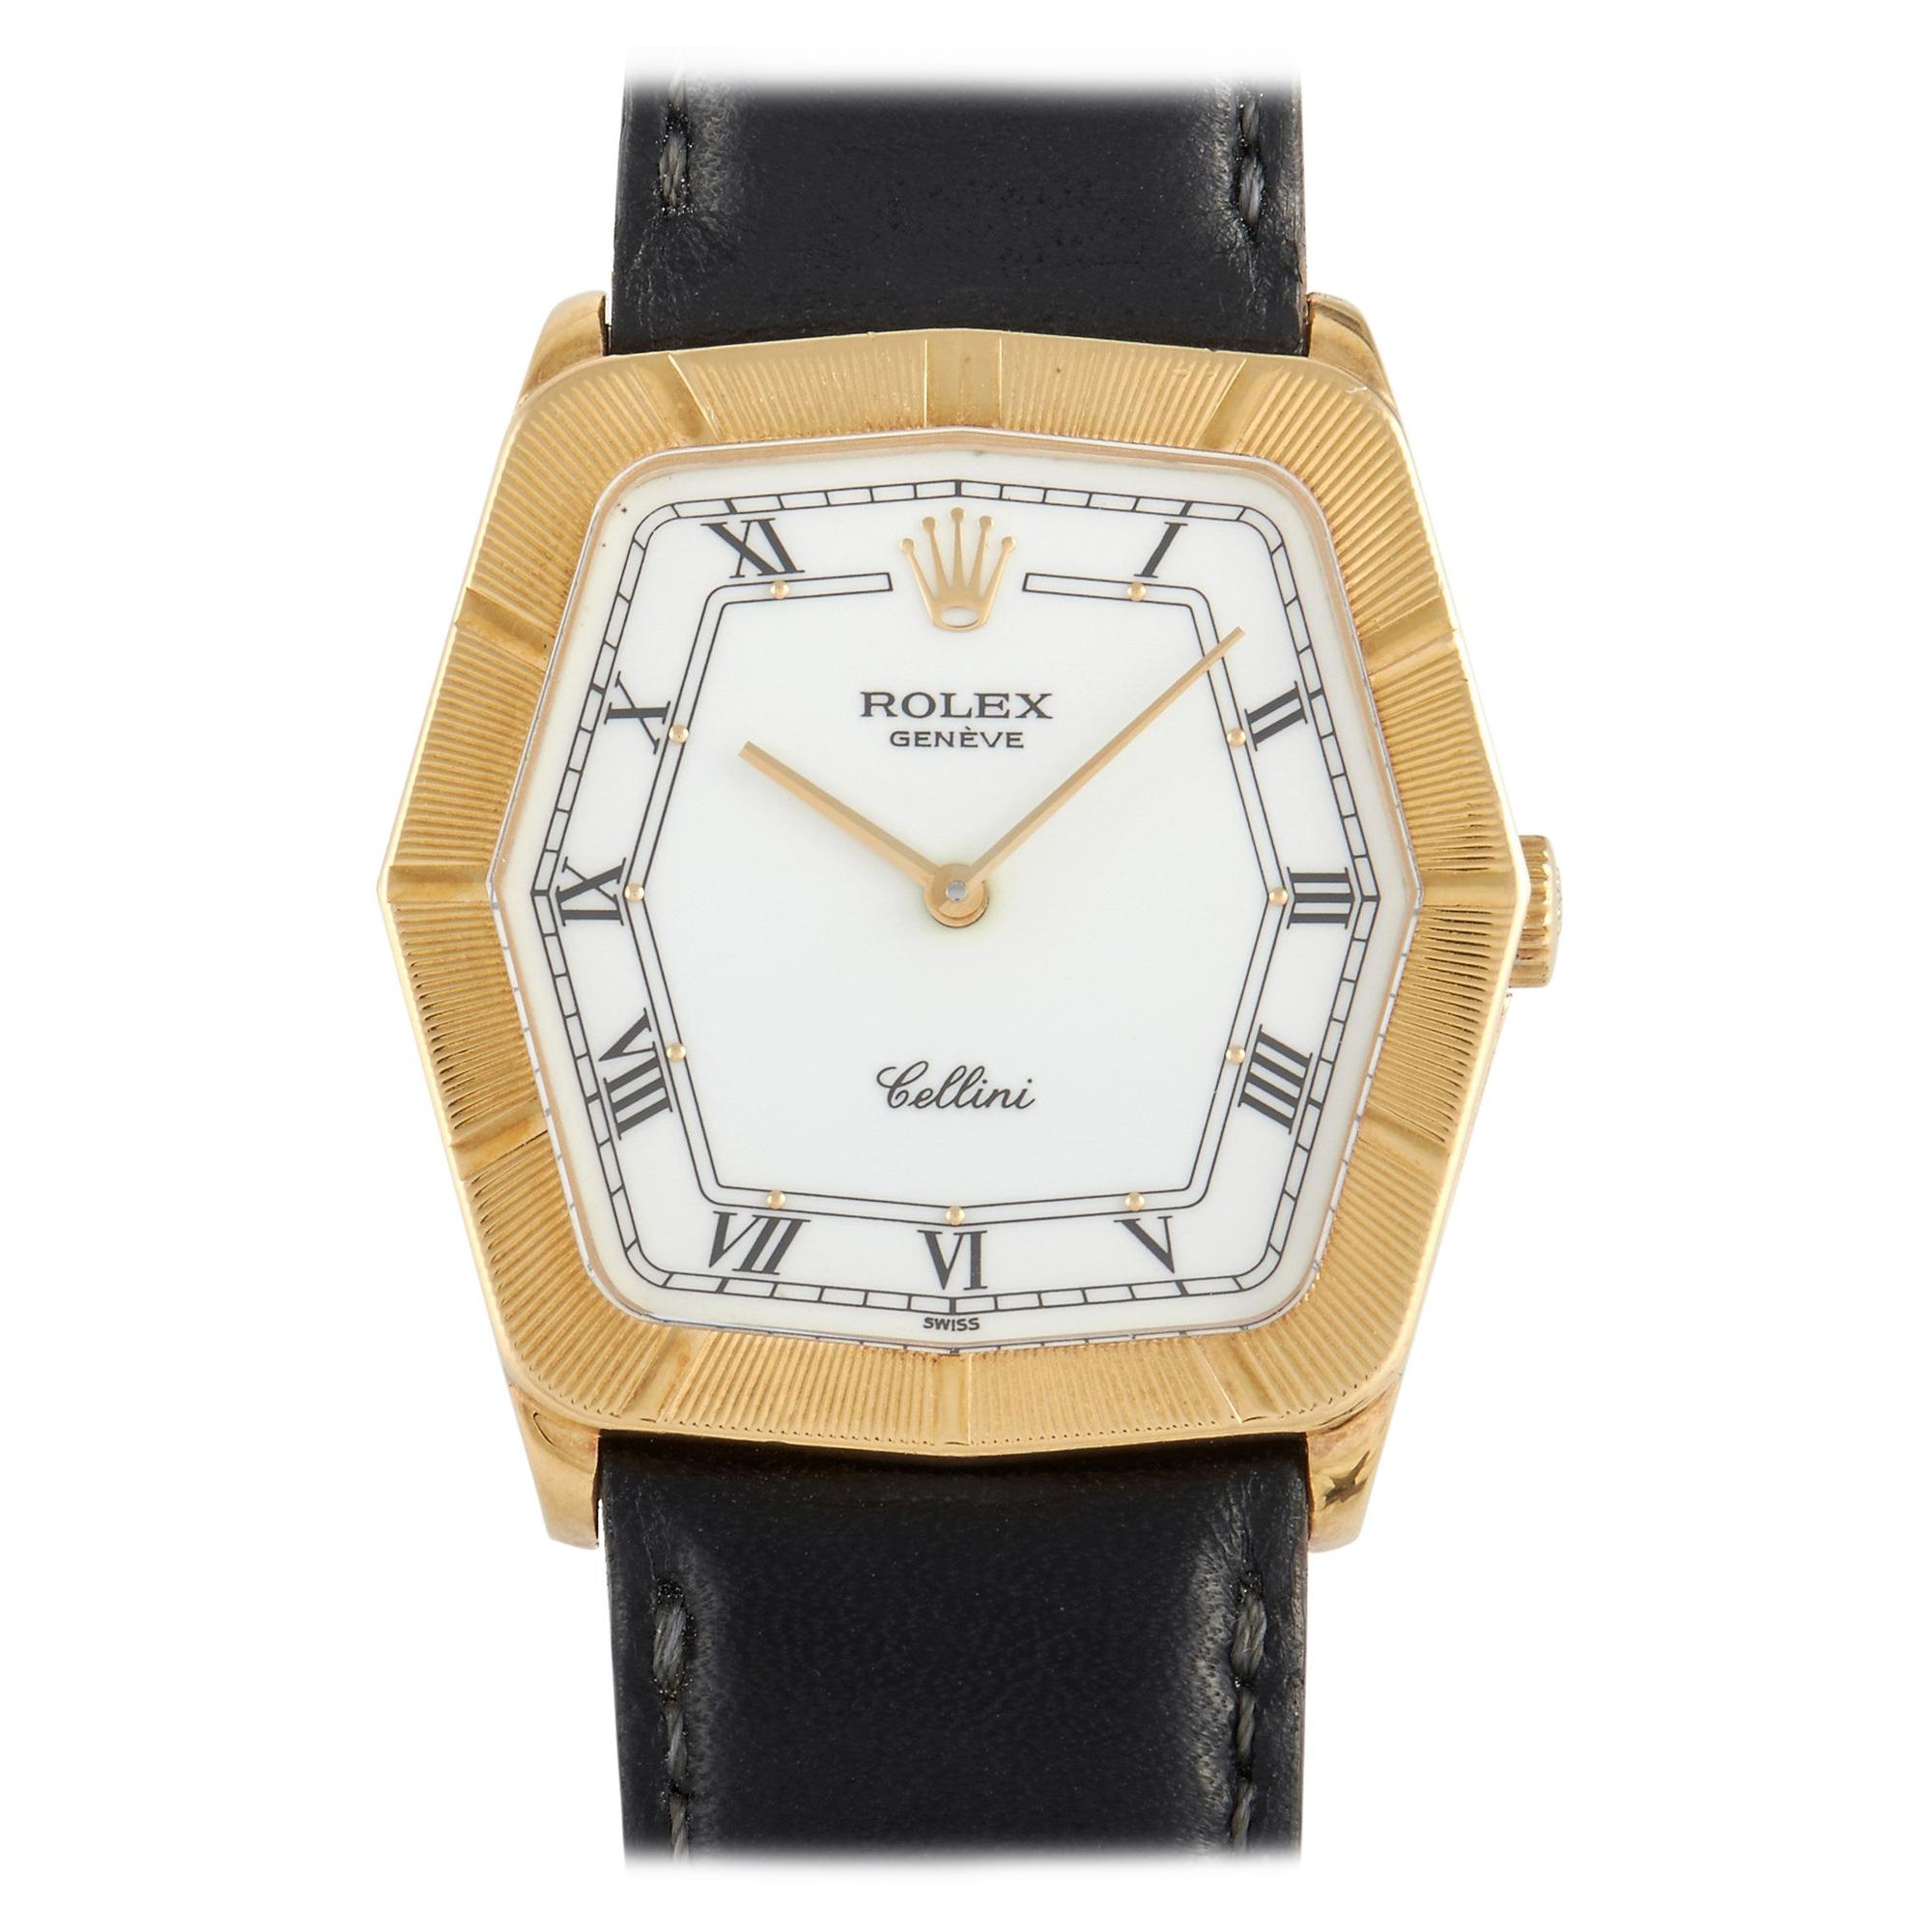 Rolex Cellini Yellow Gold Watch 4170/8 